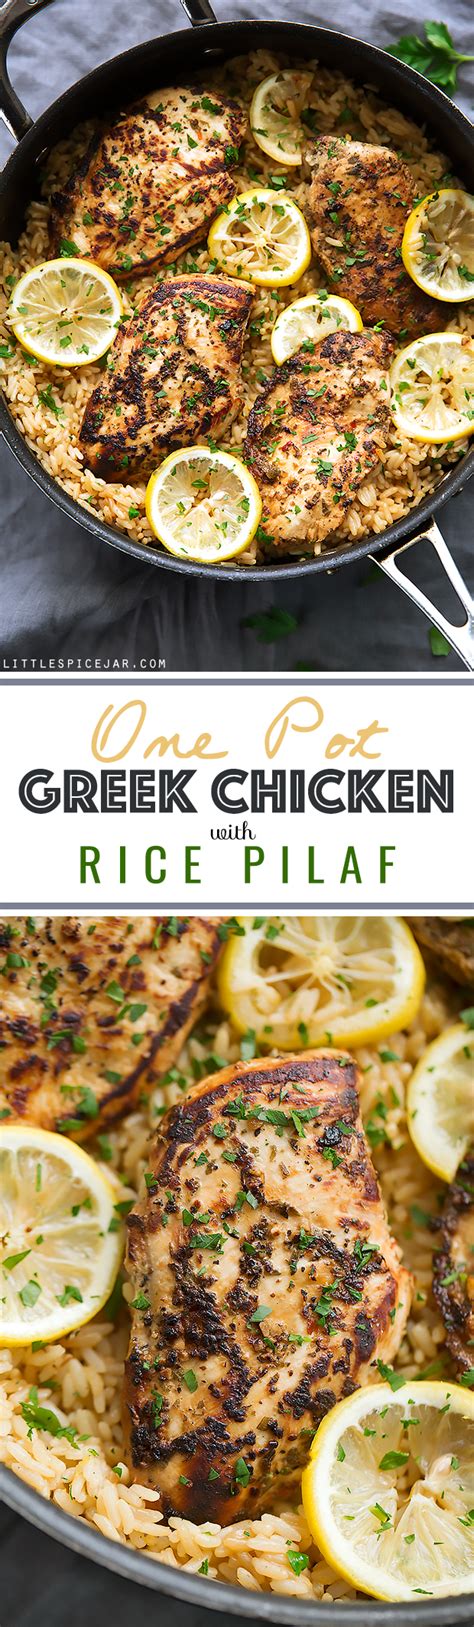 One Pot Greek Chicken And Rice Pilaf Recipe Little Spice Jar